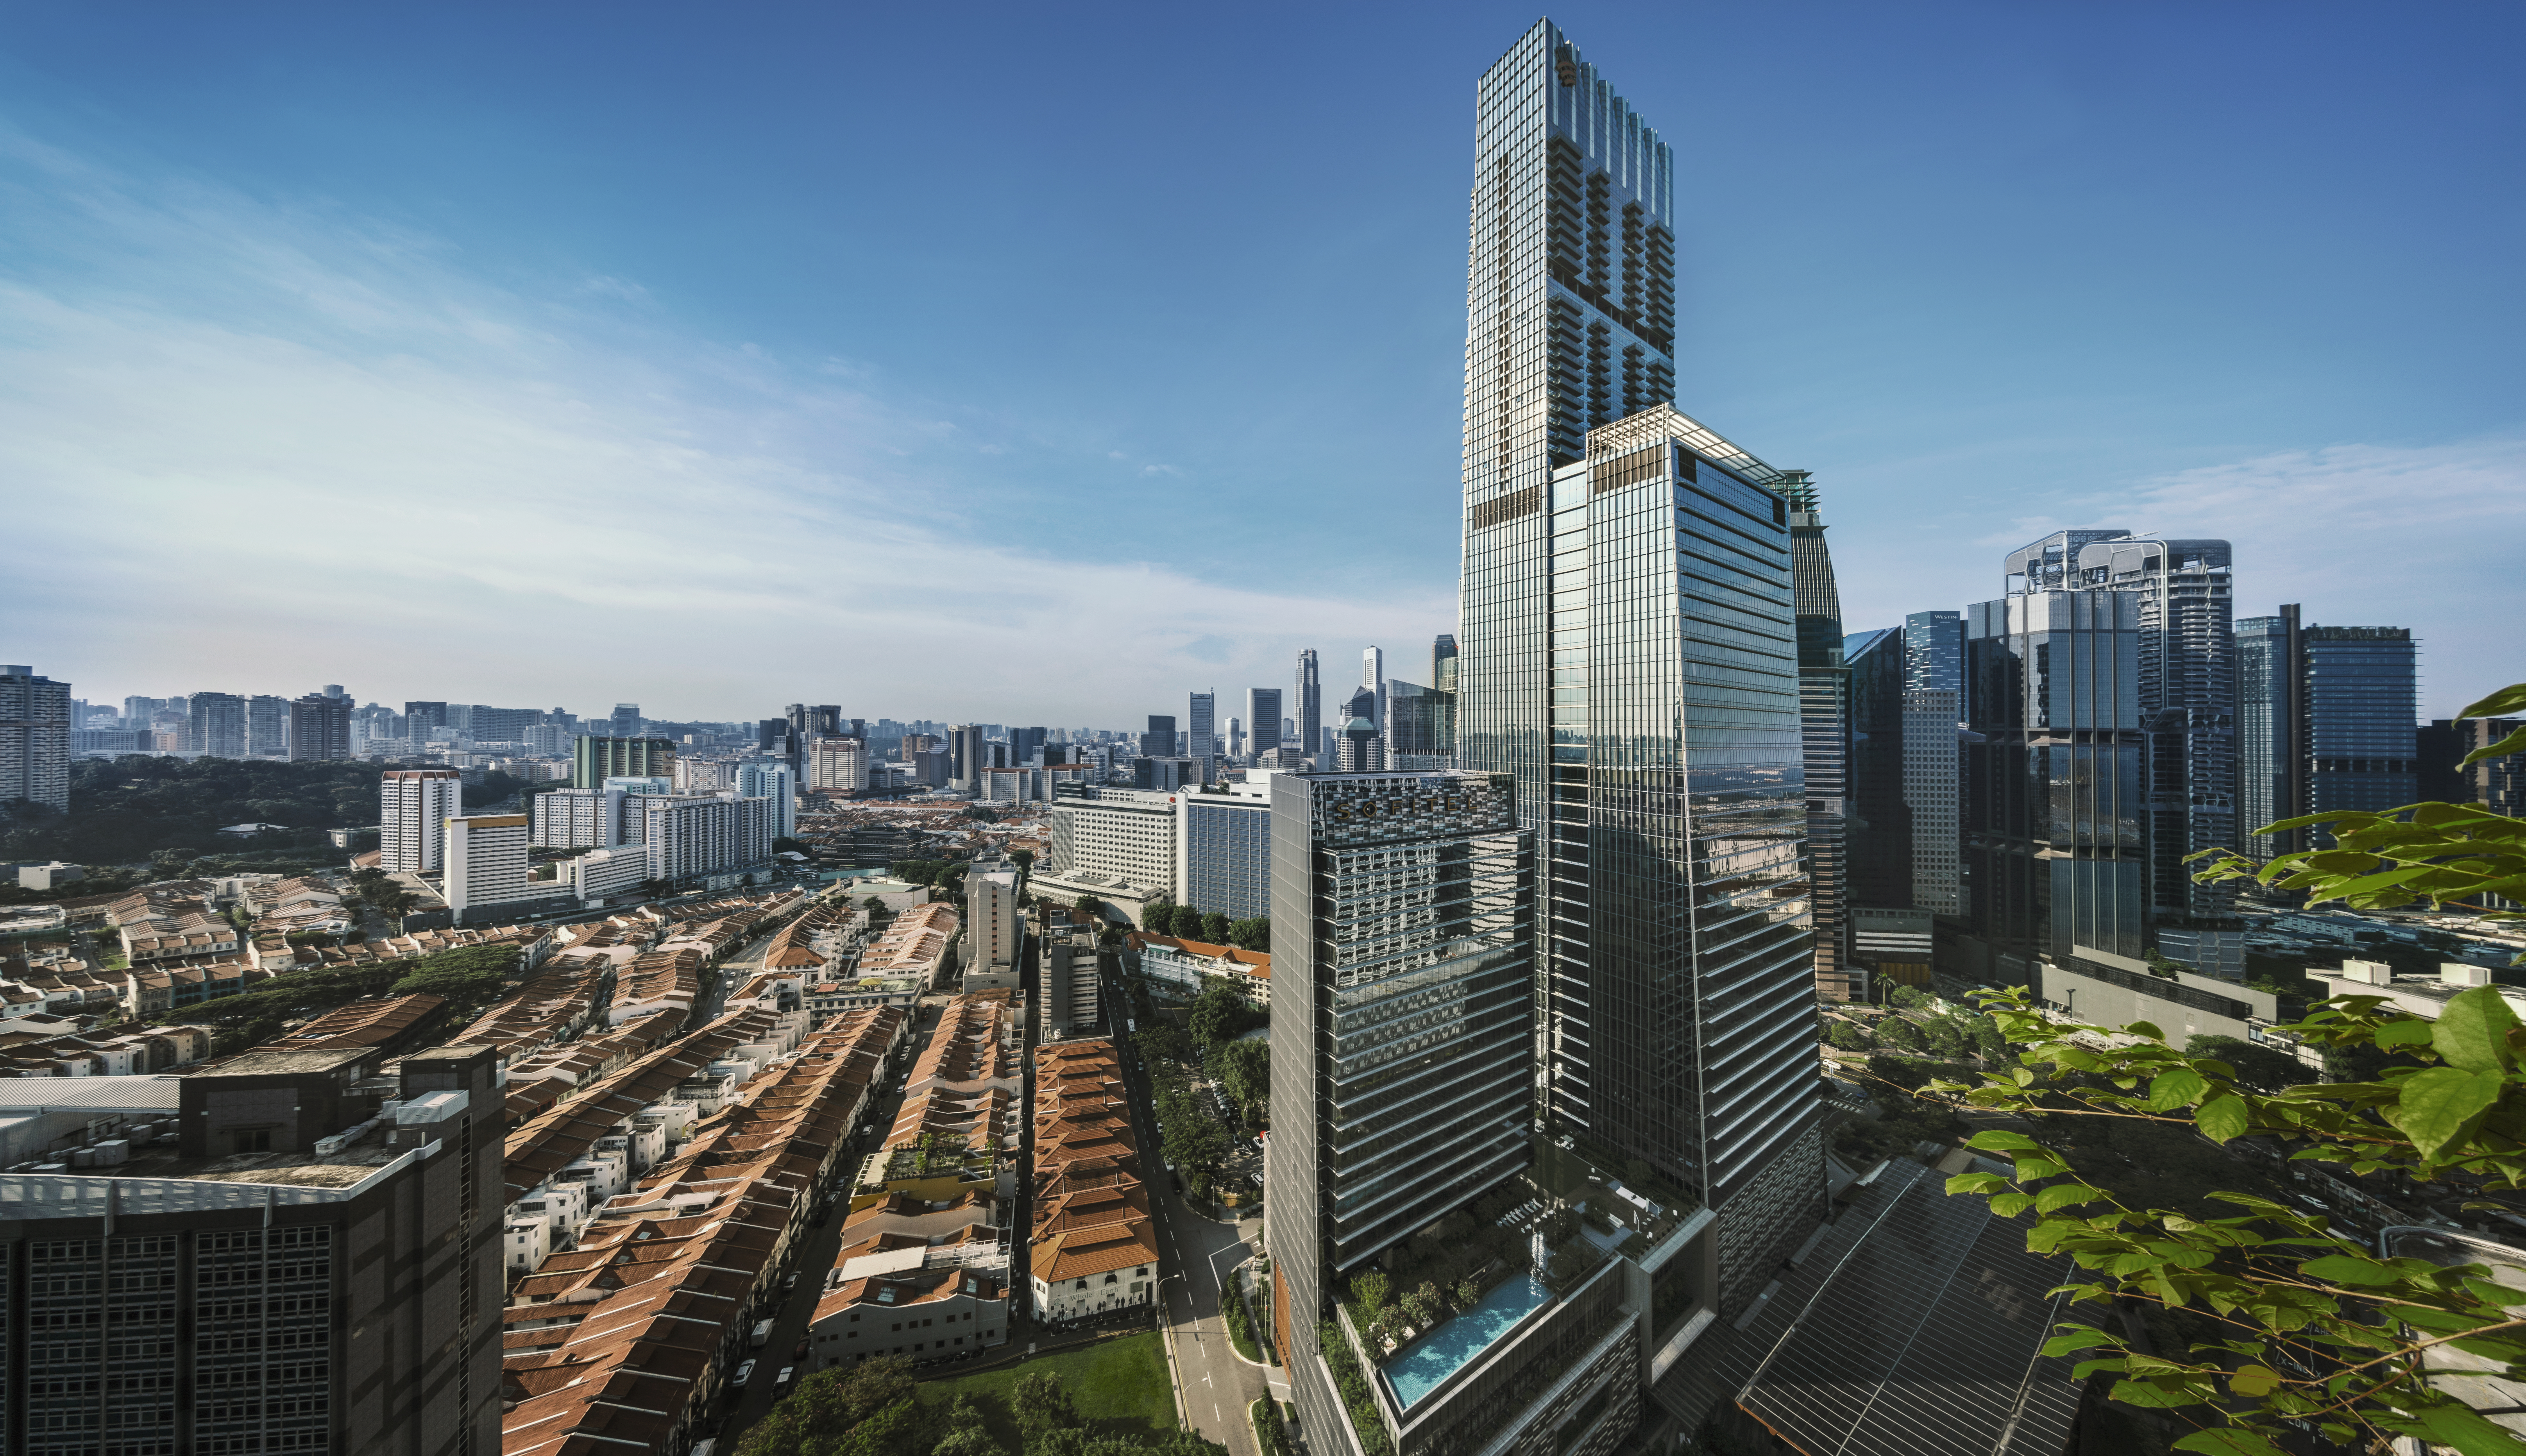 Wallich Residence sits at the pinnacle of Guoco Tower, an ambitious vertical city that will be the focal point of the Tanjong Pagar precinct. An integrated development, Guoco Tower houses Grade A offices, luxury residences, a 5-star business hotel, an extensive variety of retail and F&B options, and a lush urban park.